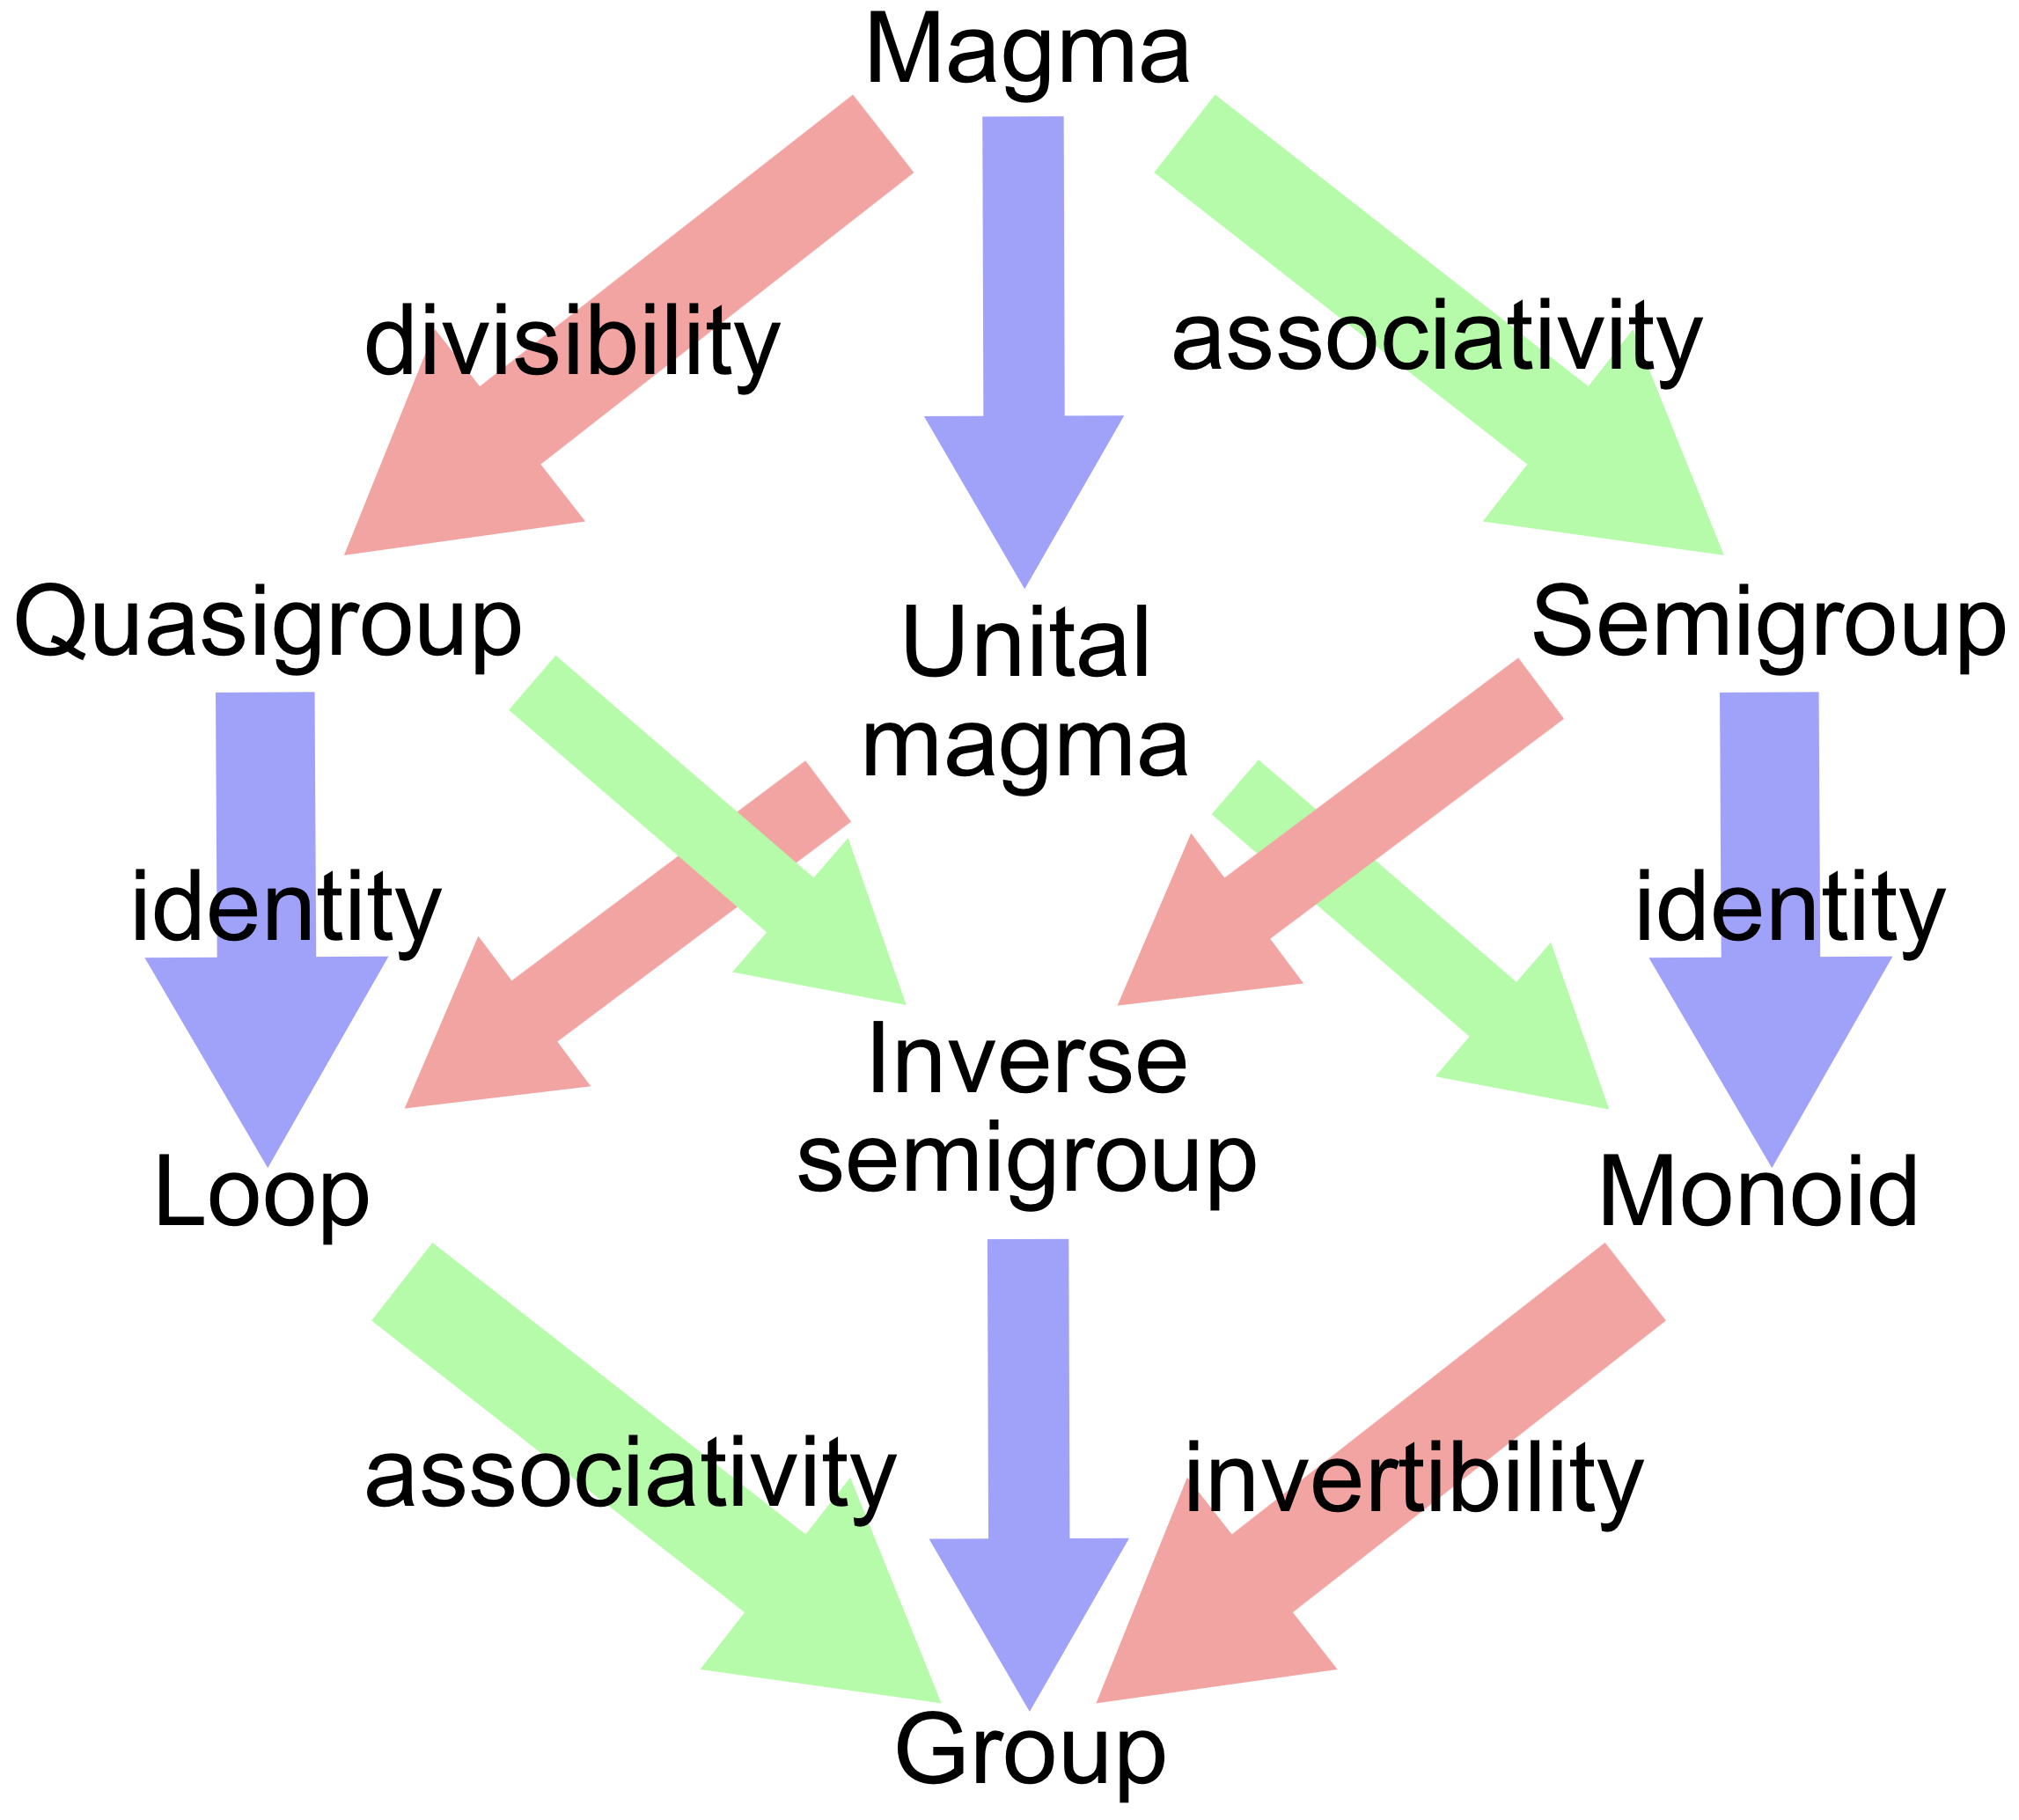 Groupoid hierarchy